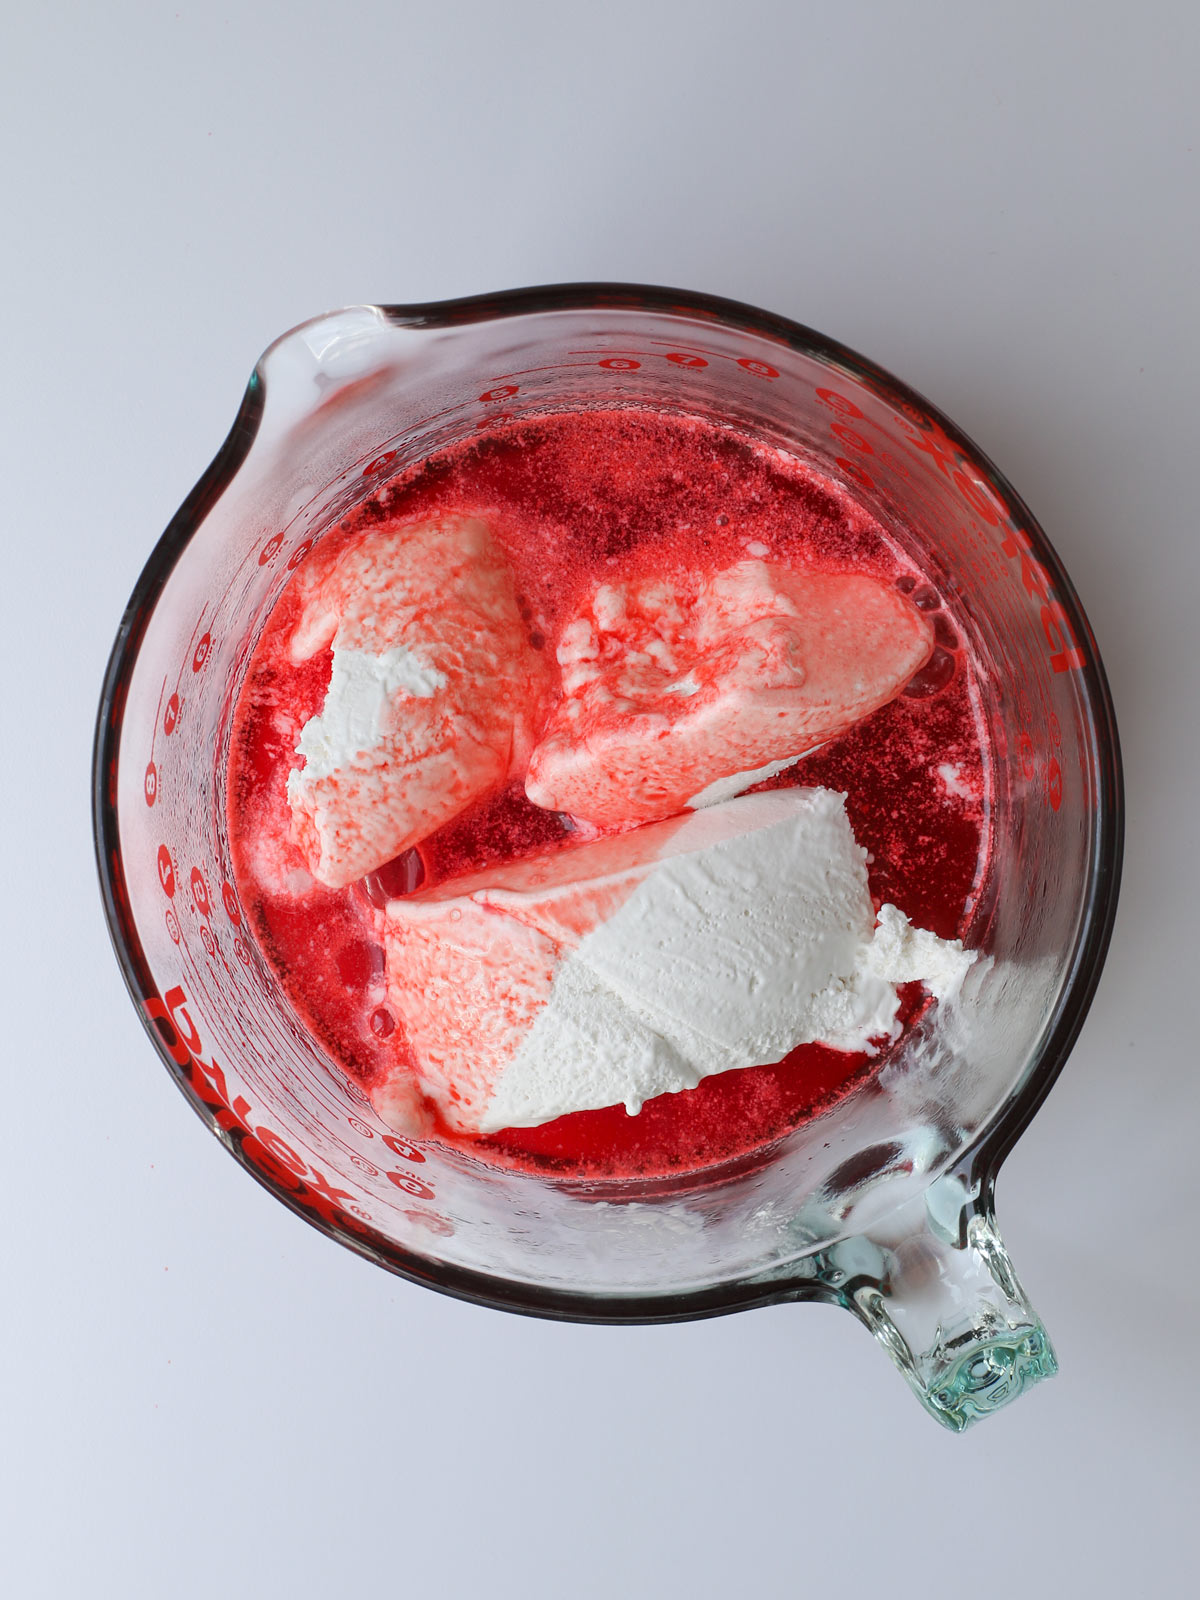 adding frozen whipped topping to hot jello mixture.